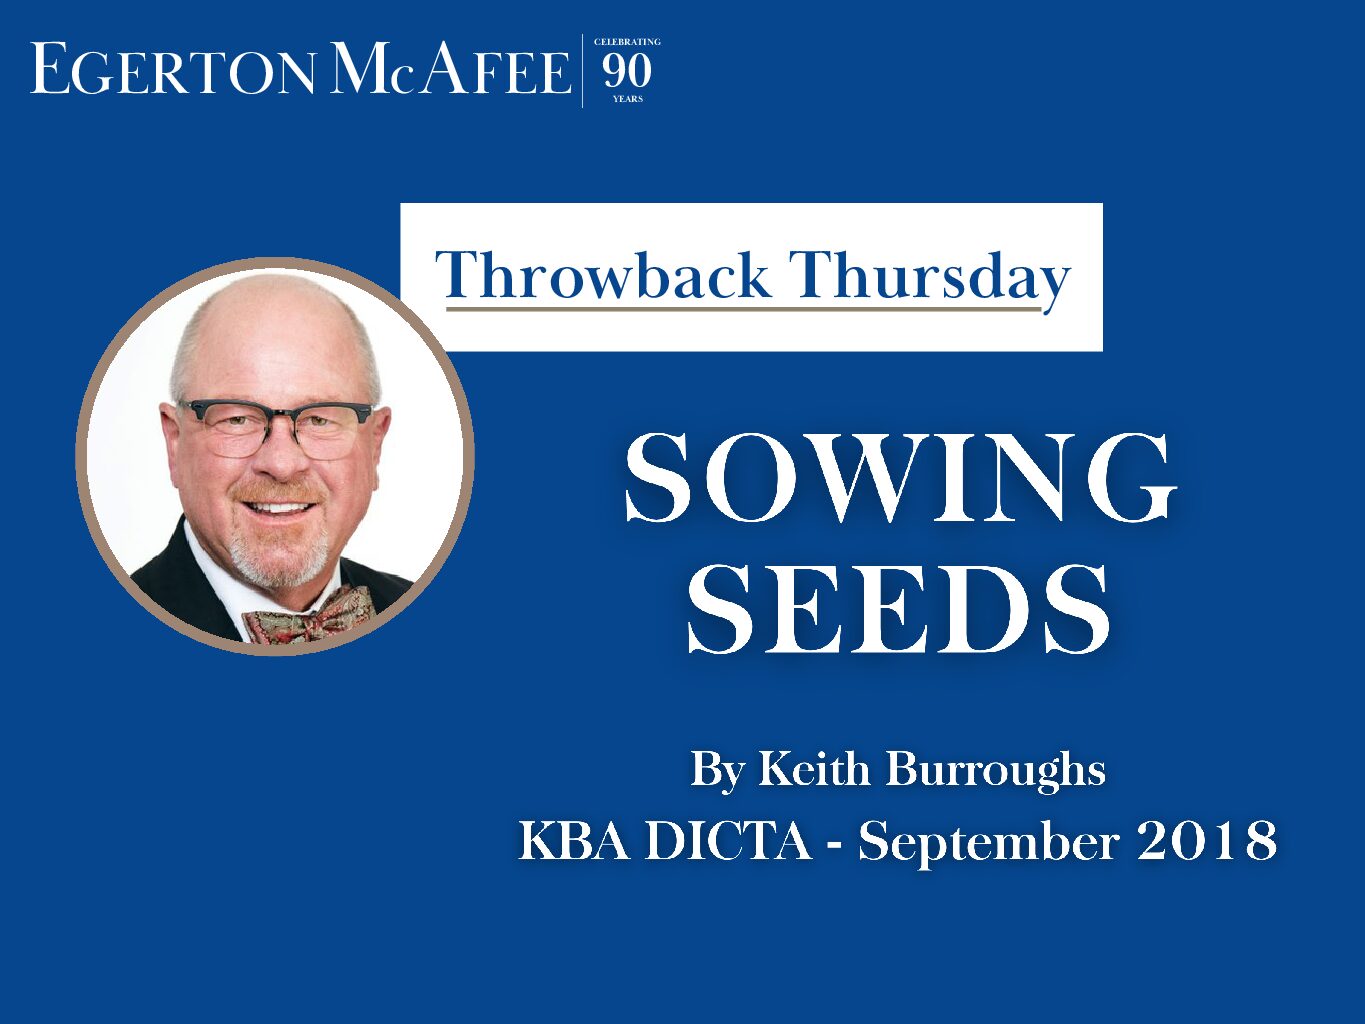 Throwback Thursday – SOWING SEEDS by Keith Burroughs